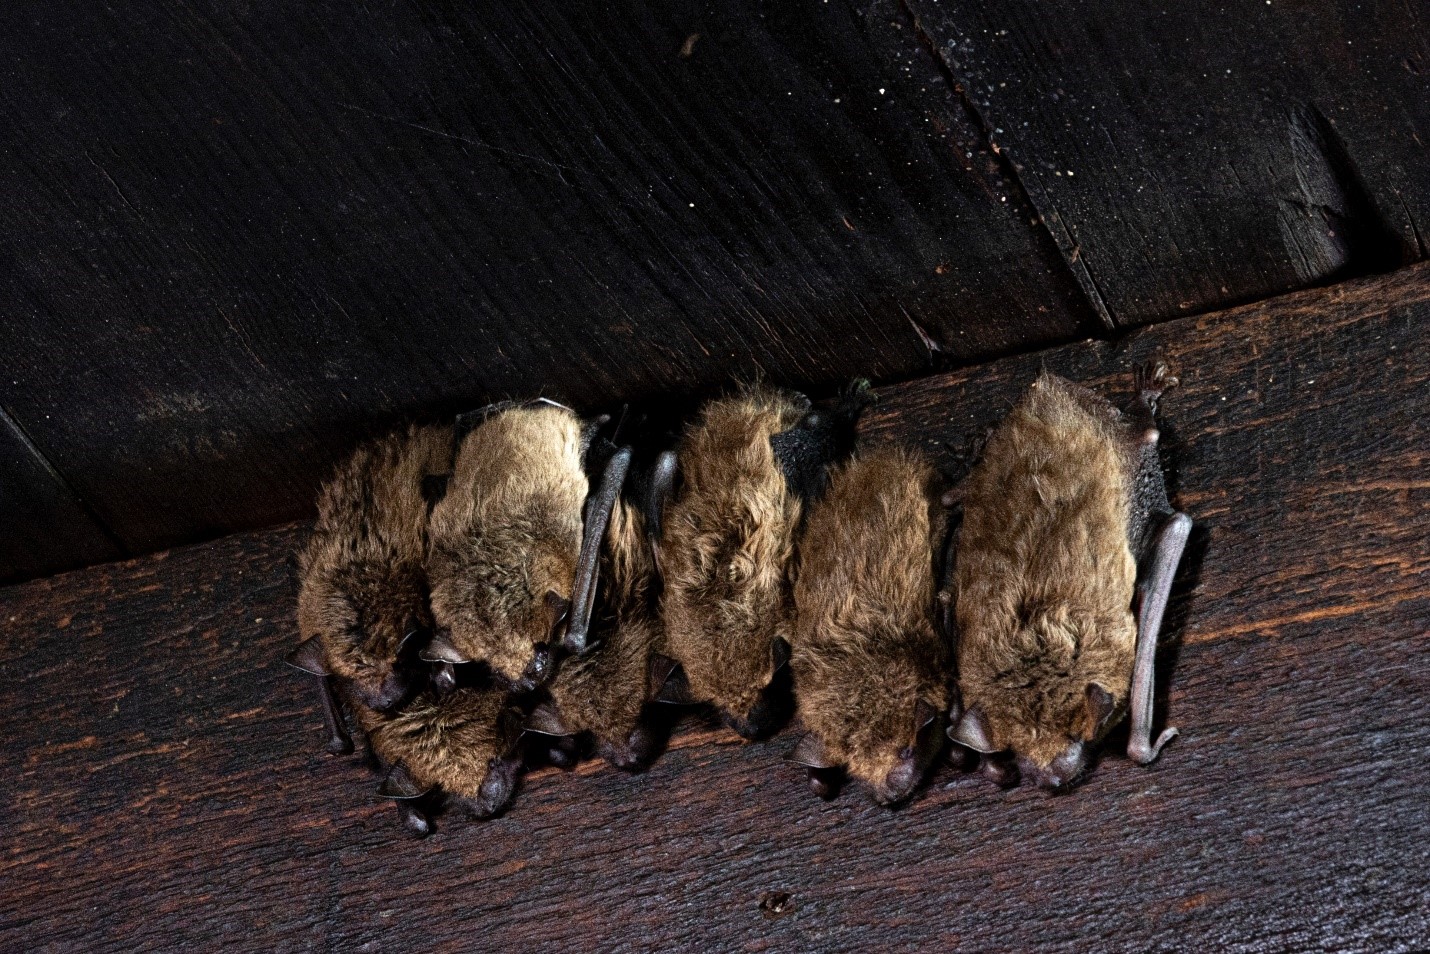 brown and black bats crowded together along the inside roofline of an attic